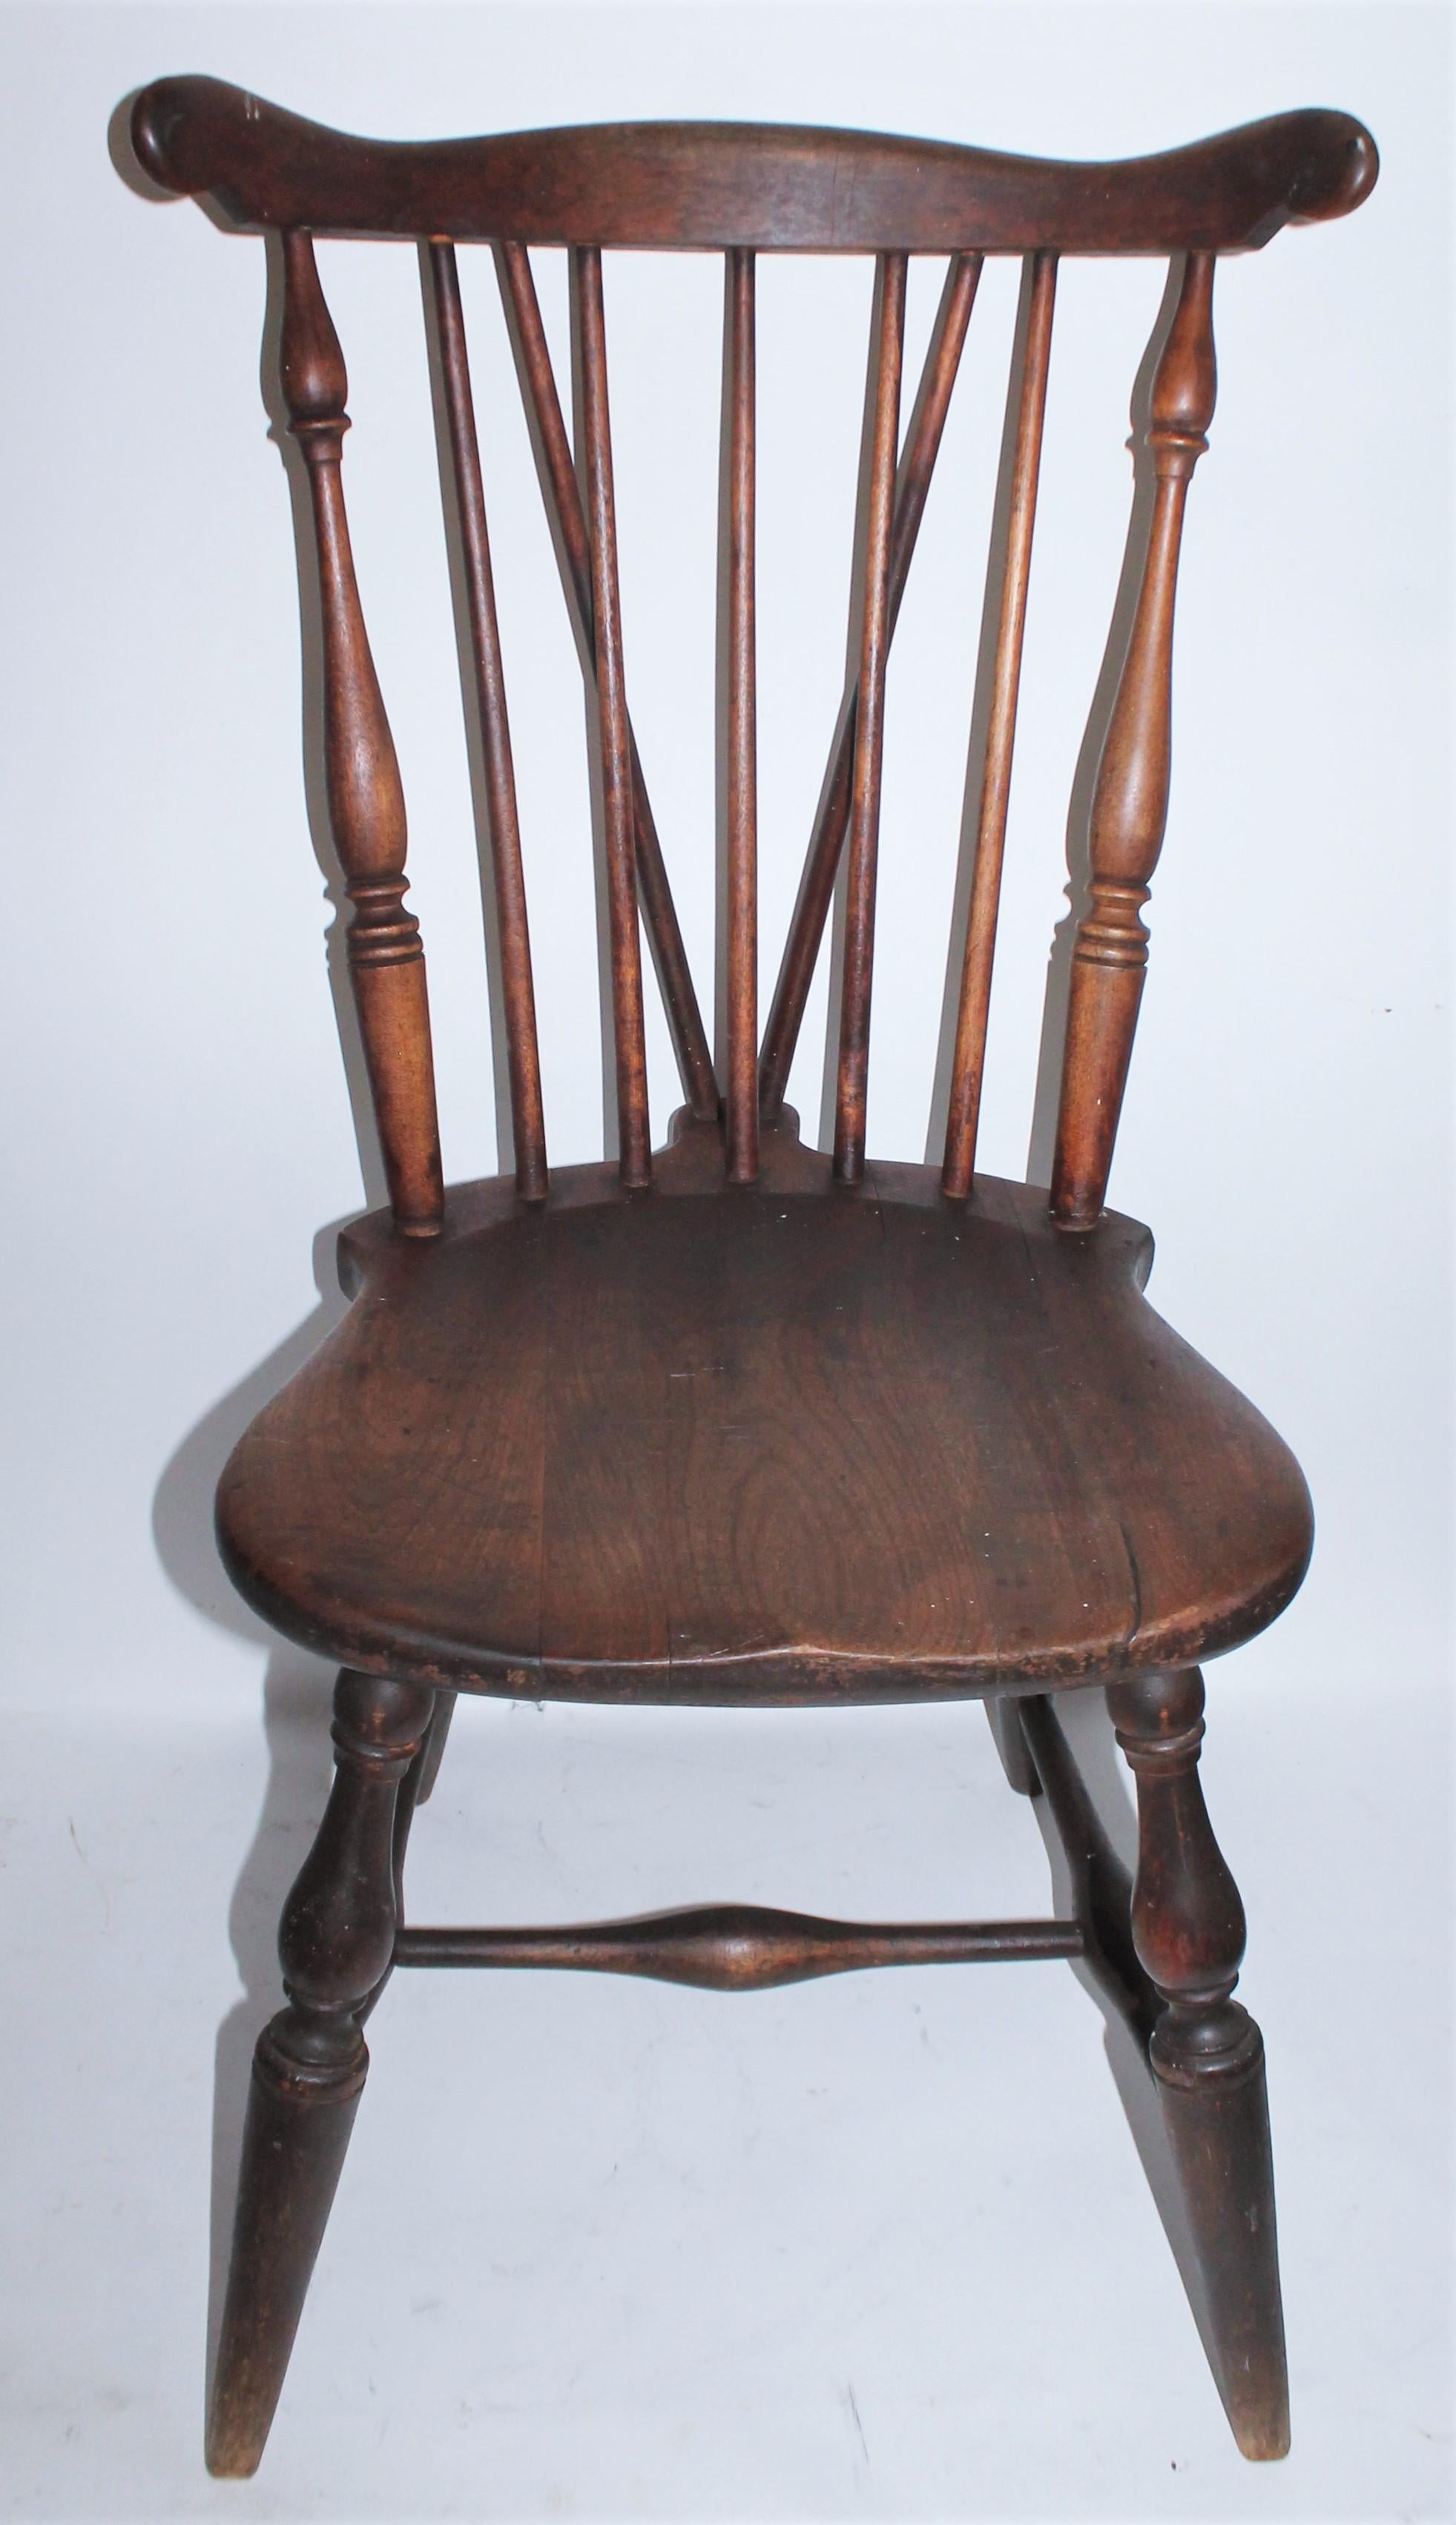 19th century brace back Windsor chair with saddle seat and in nice condition. Found in New England.